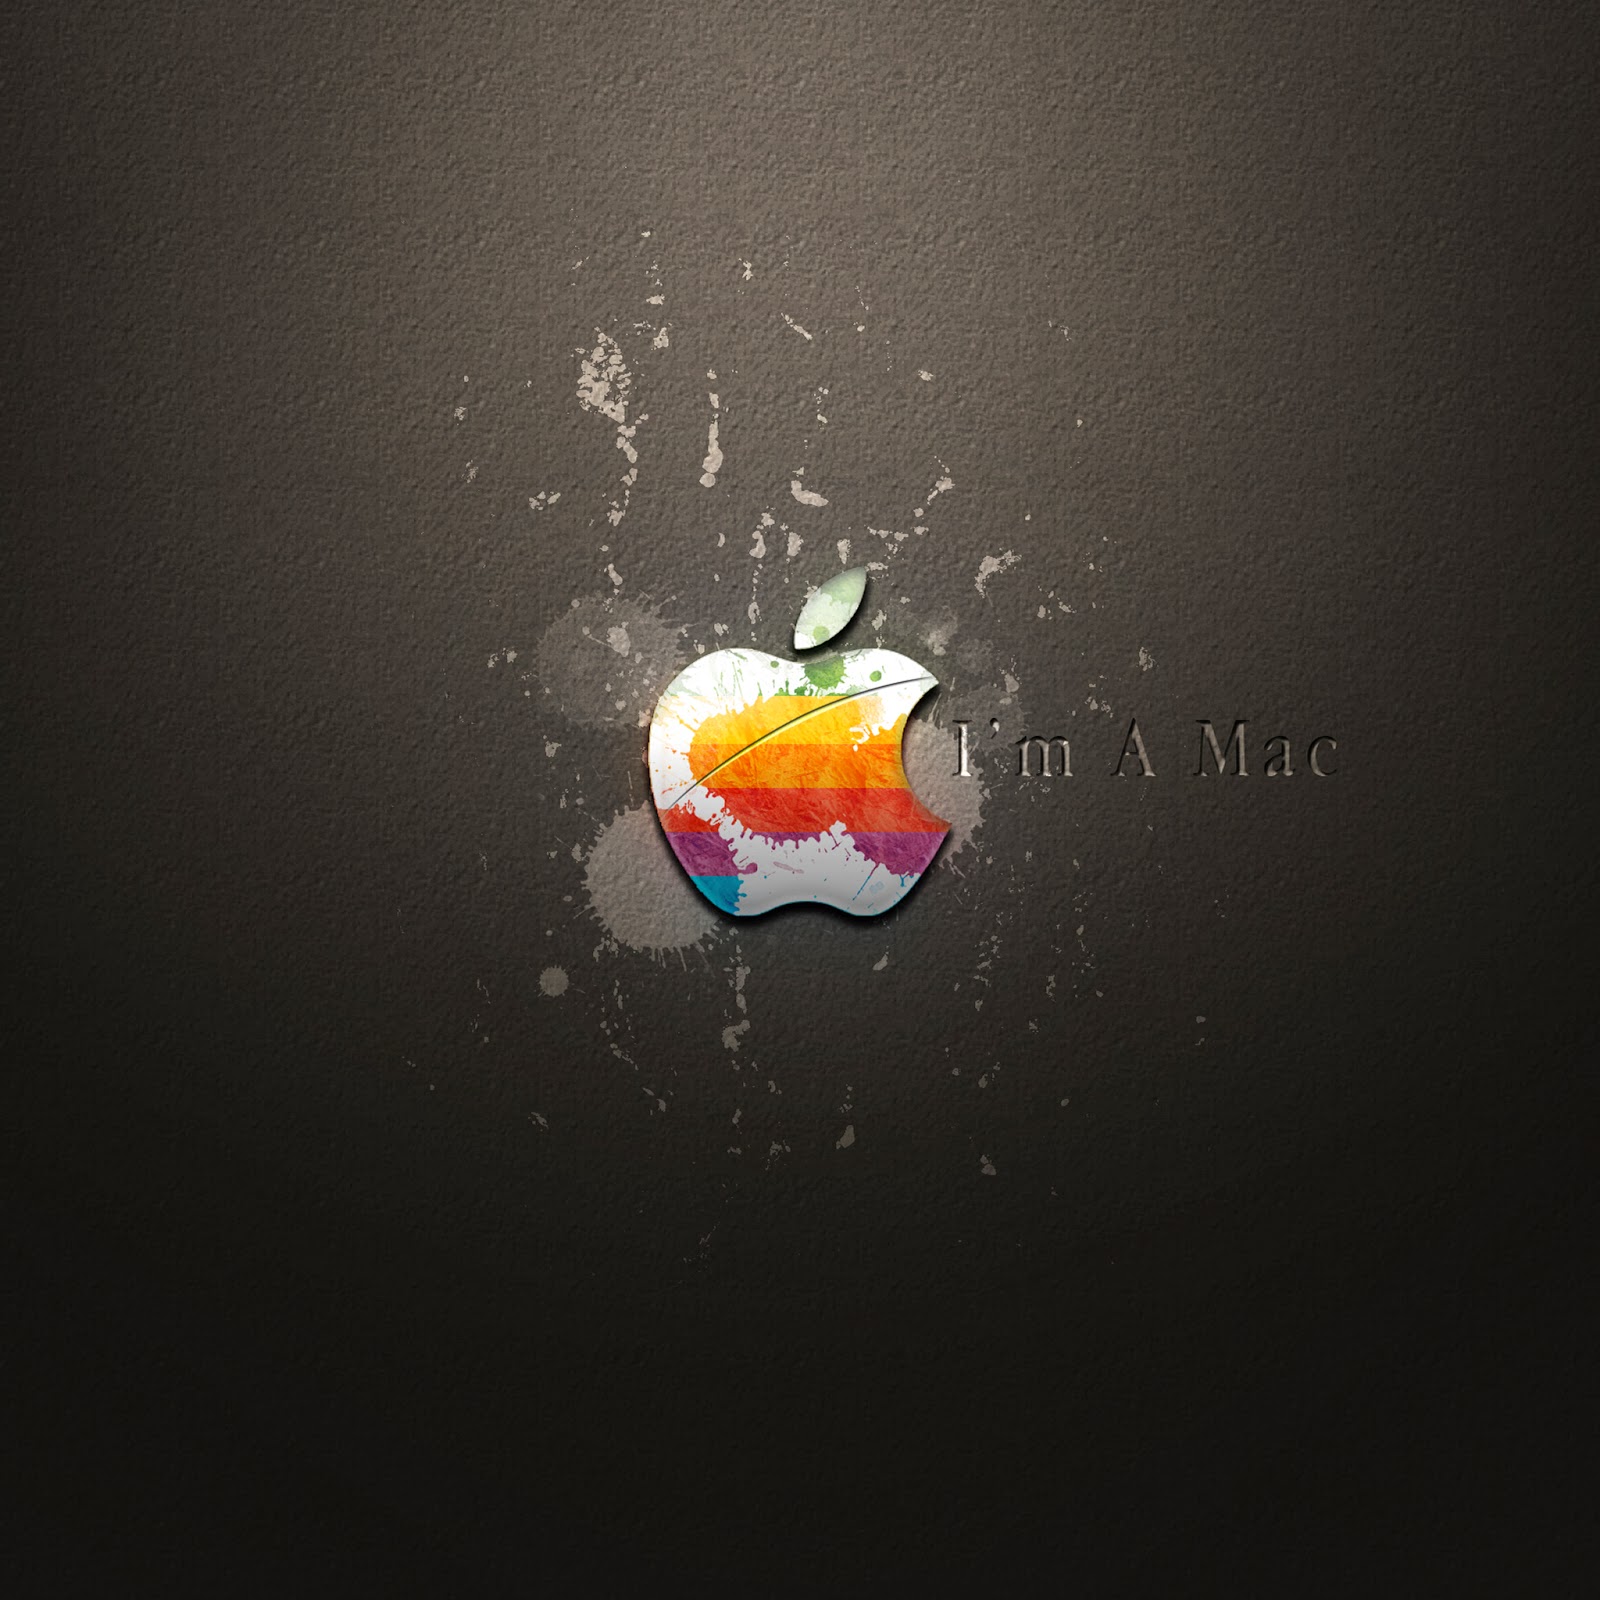 free wallpaper for ipad mini,logo,graphic design,graphics,font,operating system